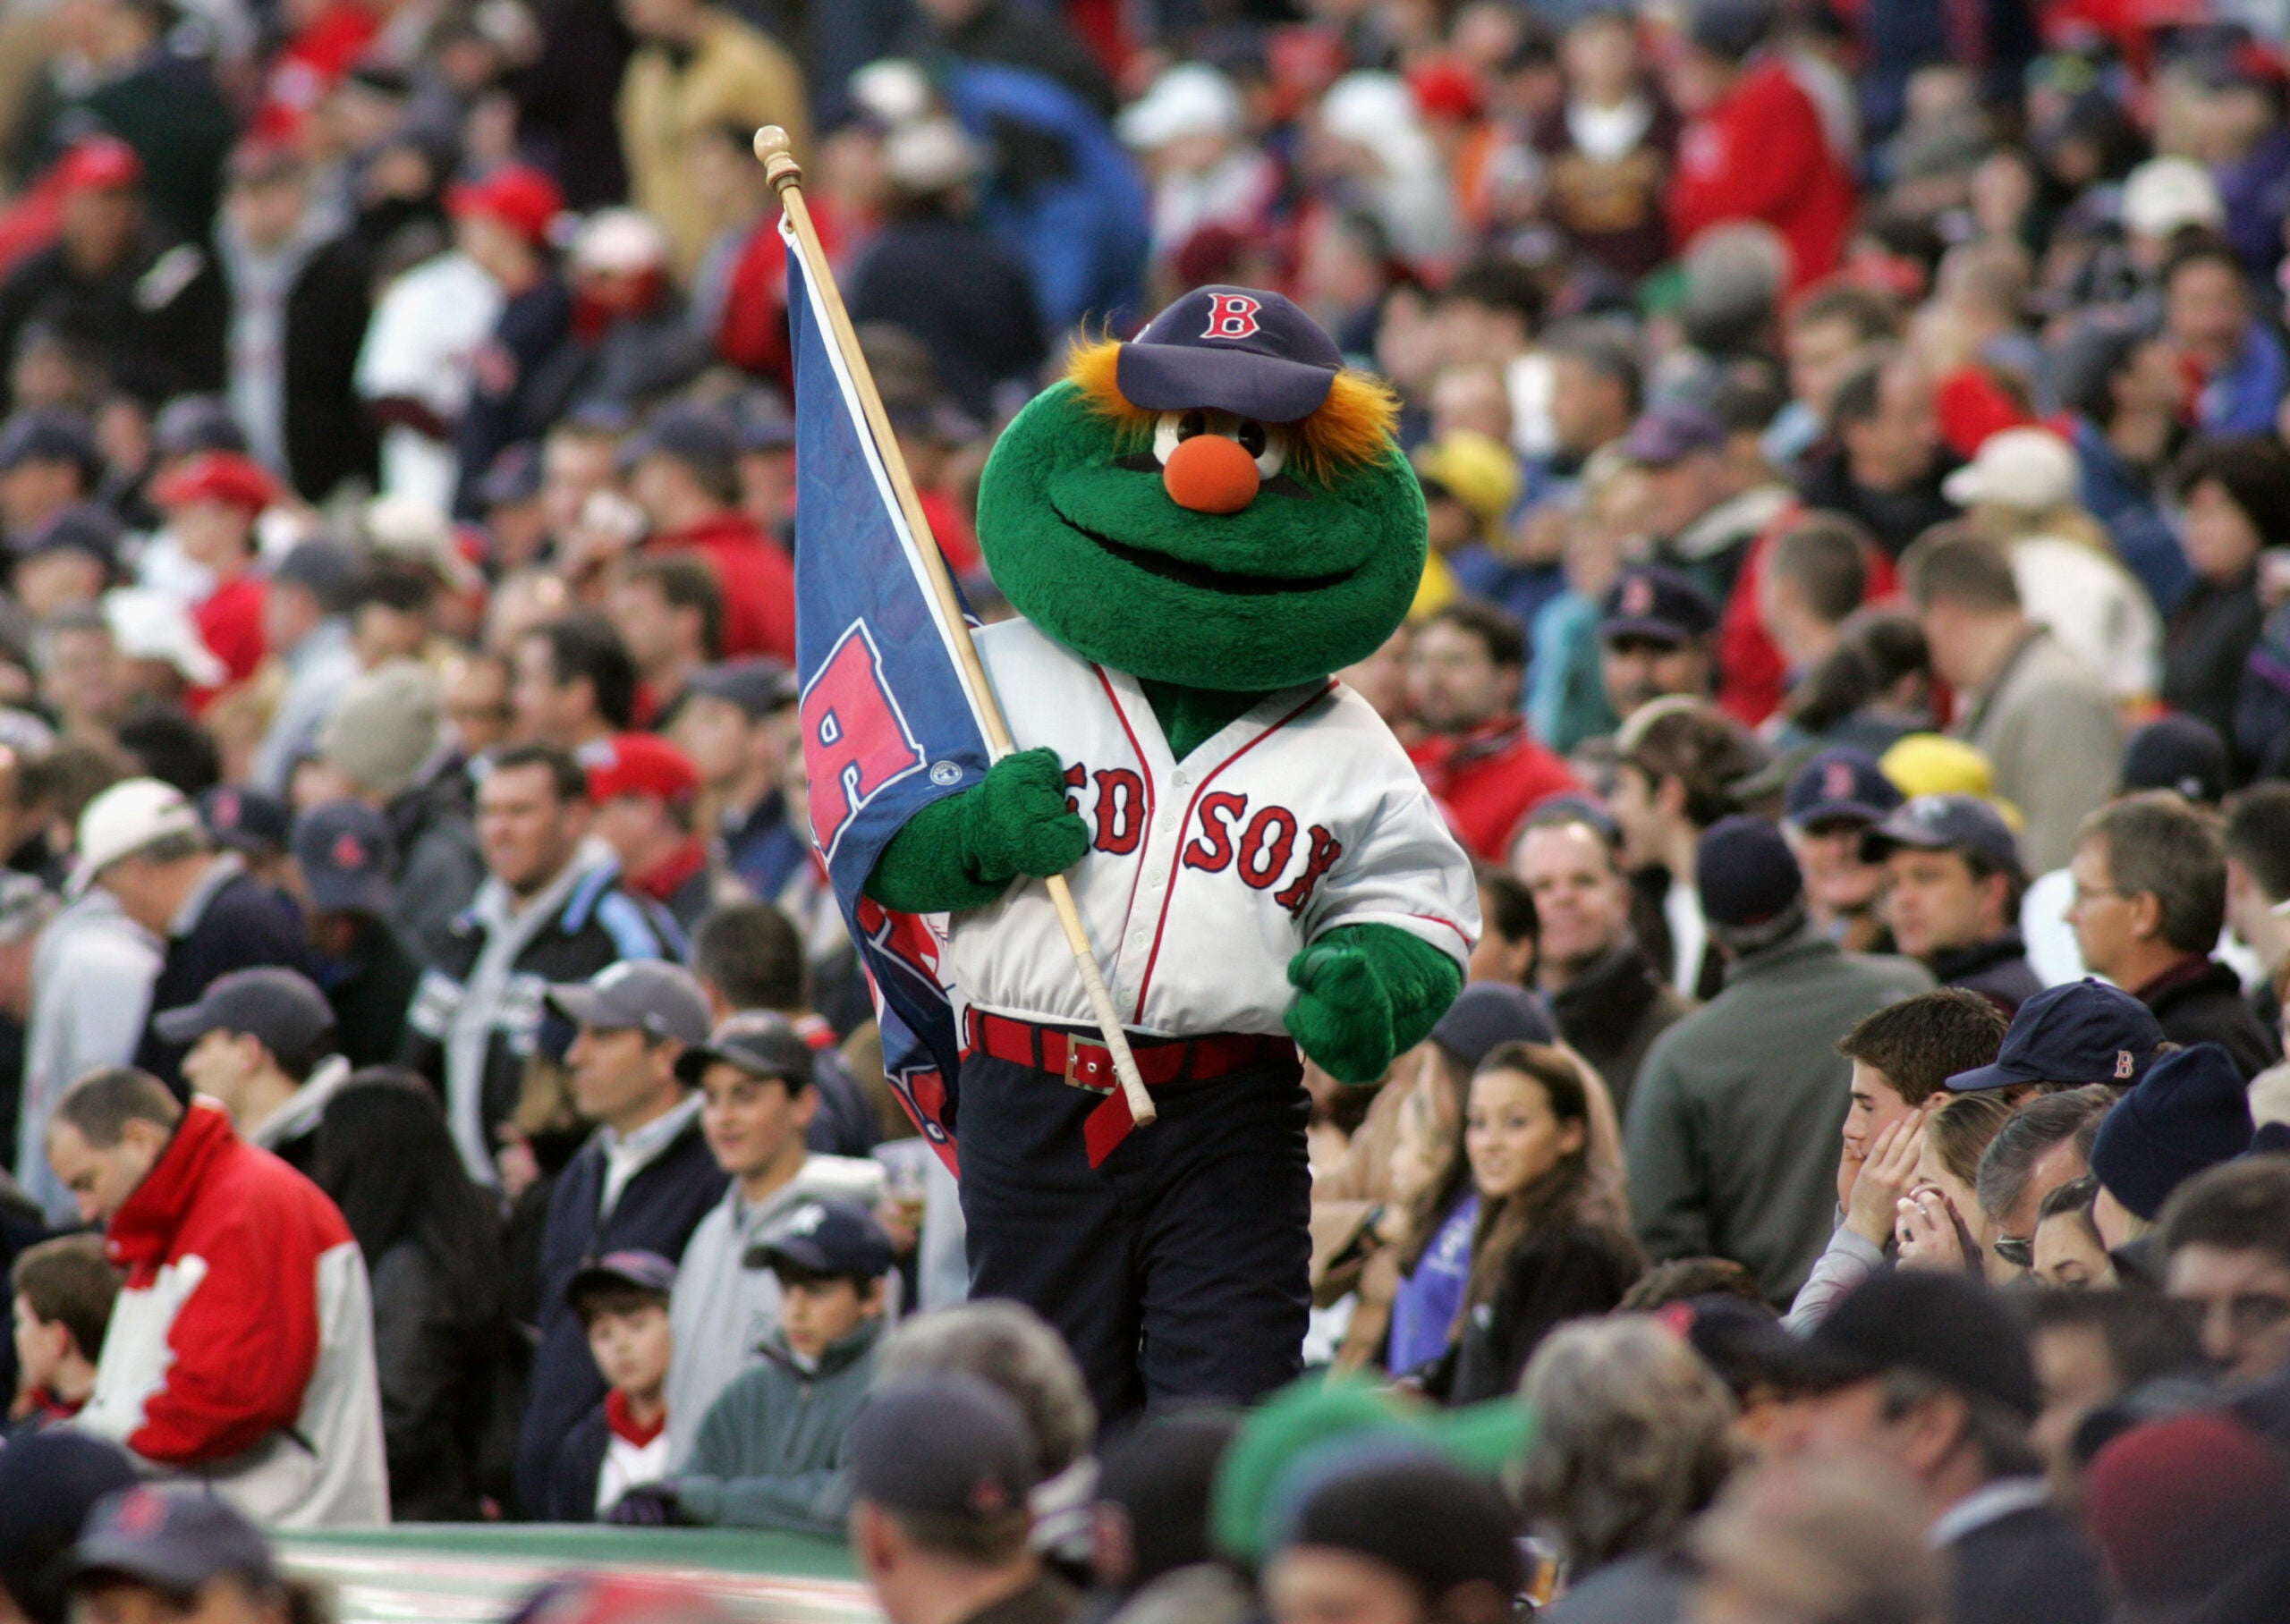 Now hiring: Red Sox on the hunt for a backup Wally mascot